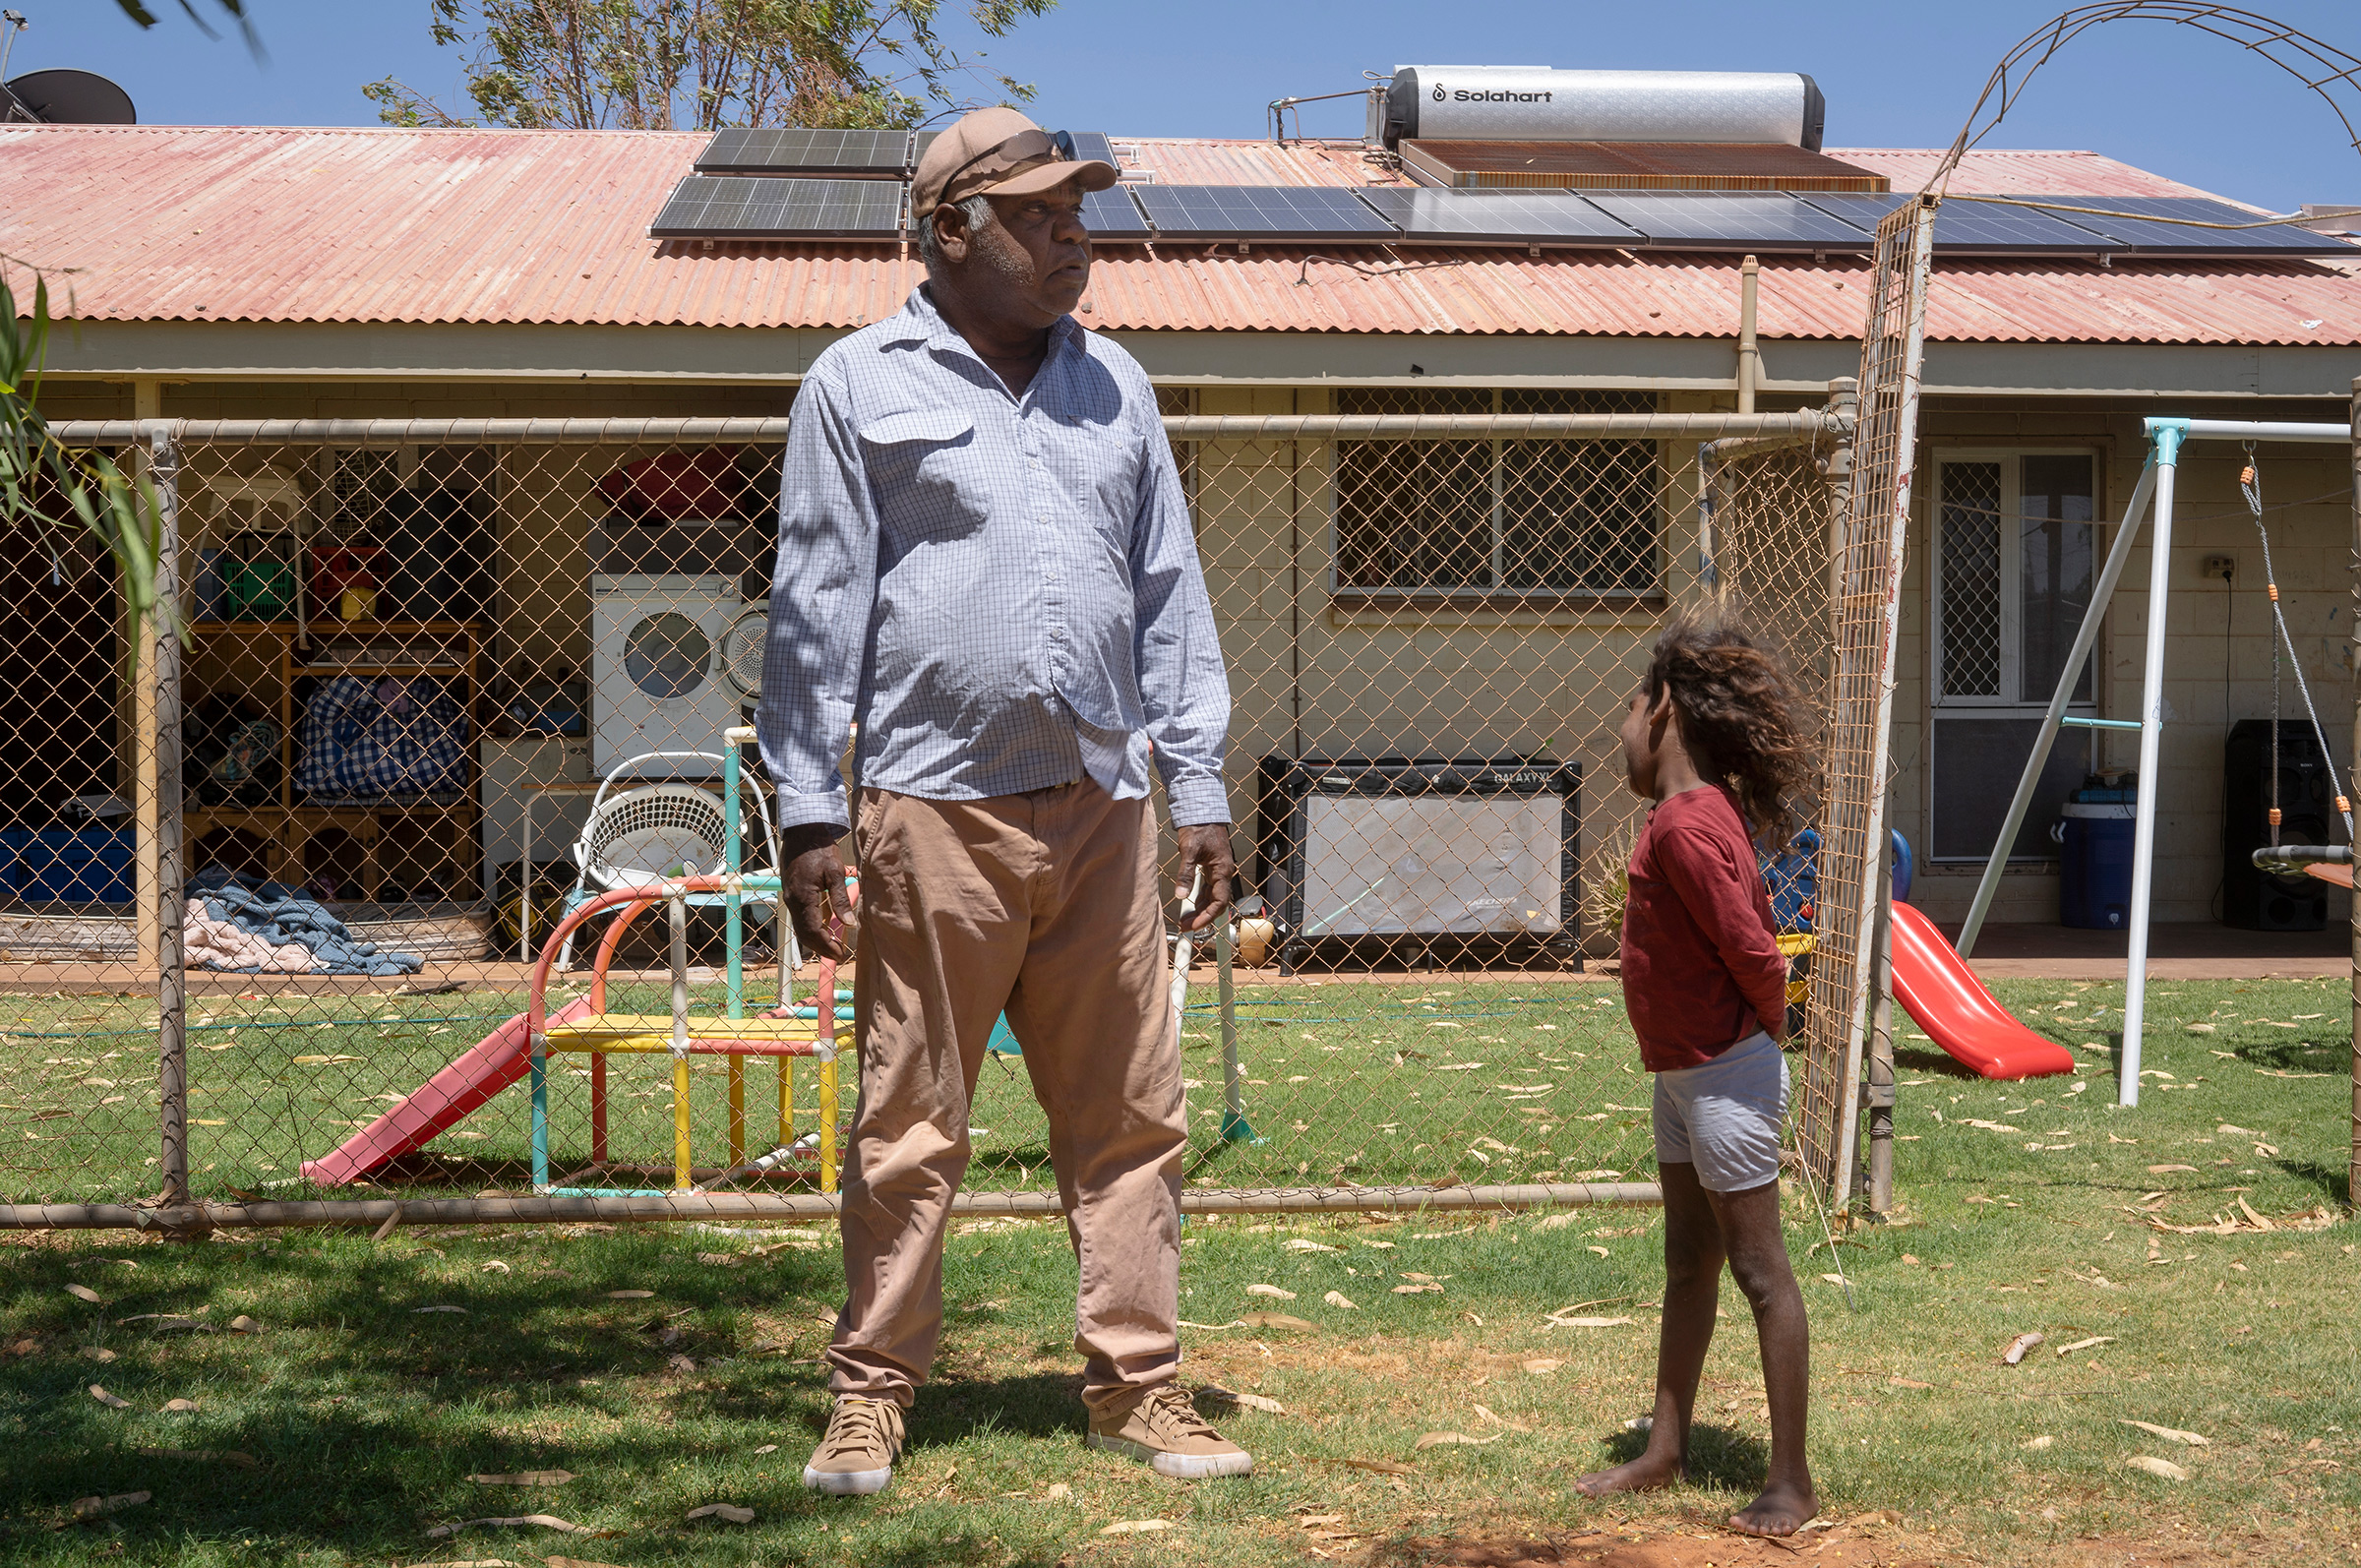 Frank in front of his Tennant Creek home. His local energy provider isn’t able to connect the solar panels on his roof to the grid, making them functionally useless